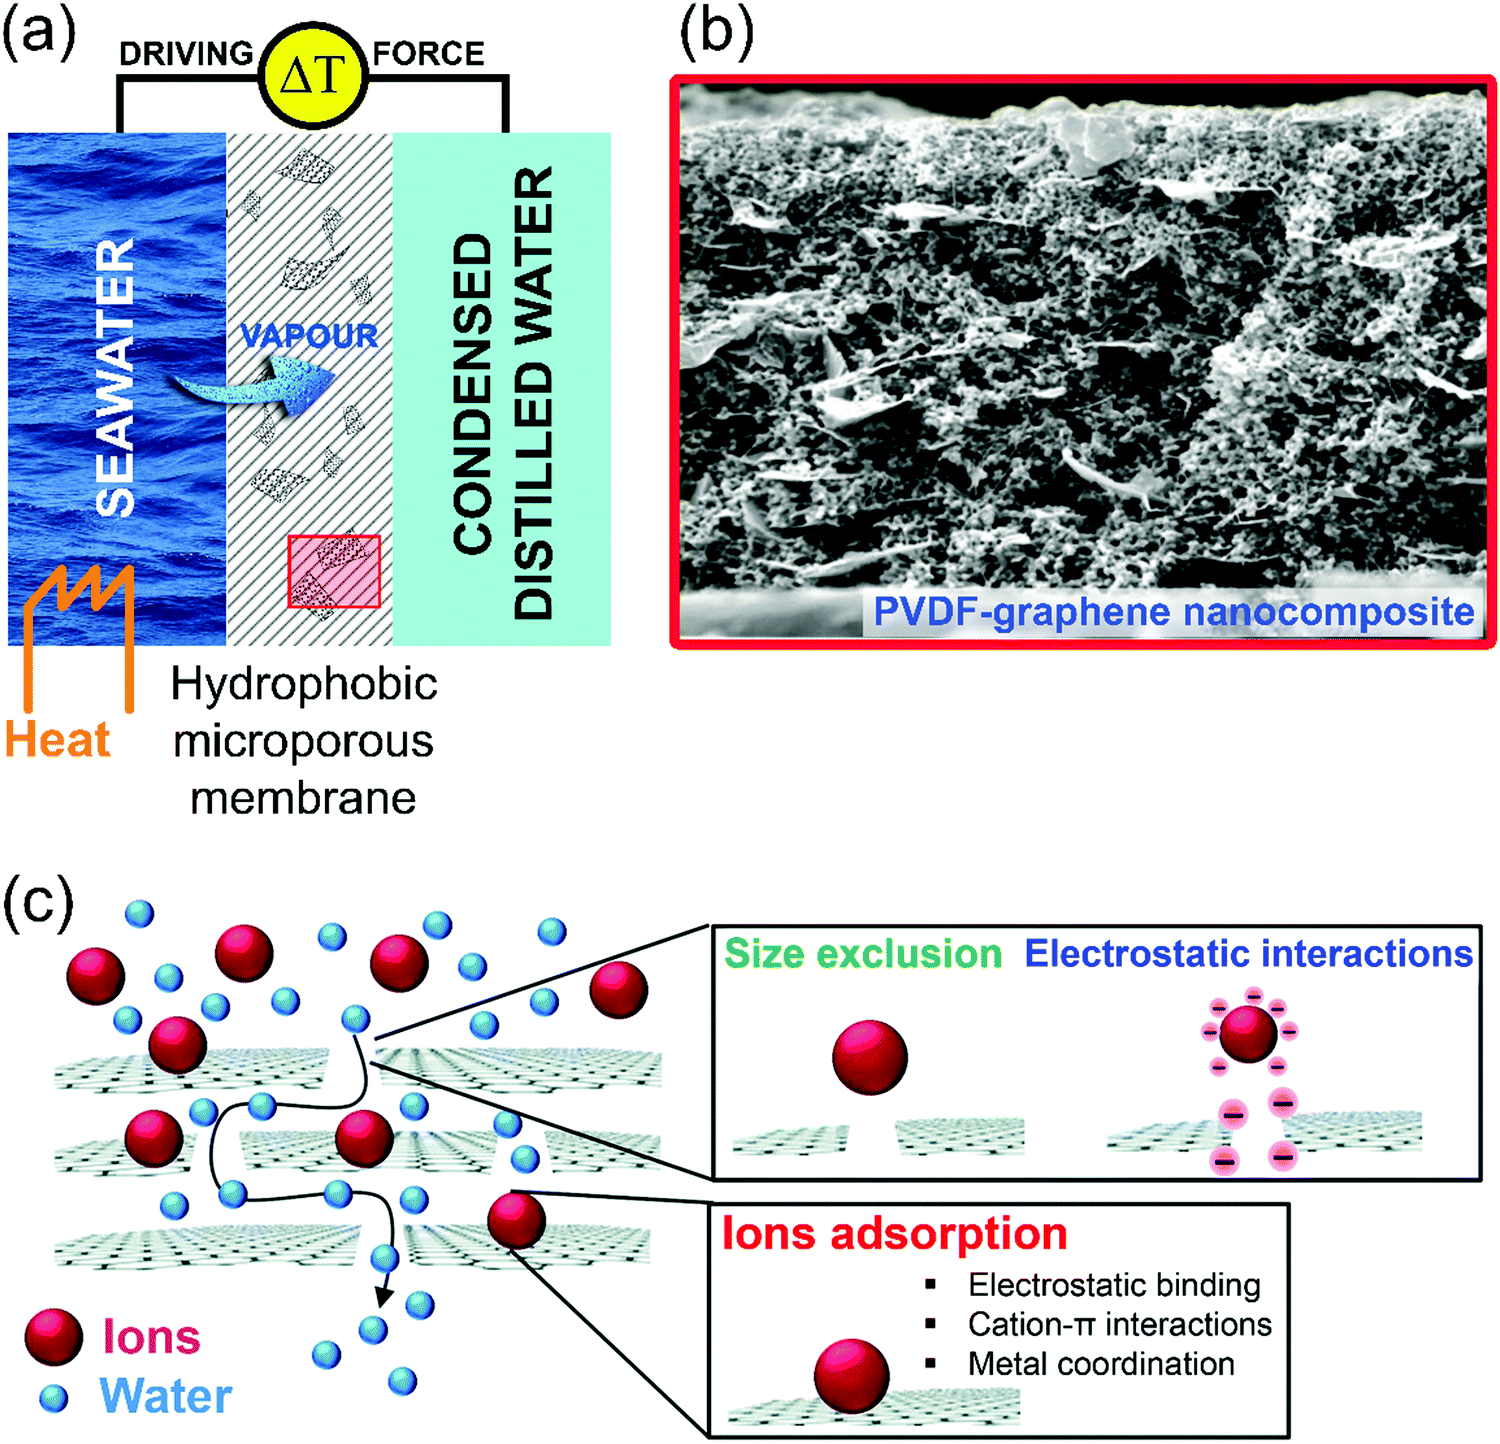 Chemical Reactions On Surfaces For Applications In Catalysis Gas Sensing Adsorption Assisted Desalination And Li Ion Batteries Opportunities And Challenges For Surface Science Physical Chemistry Chemical Physics Rsc Publishing